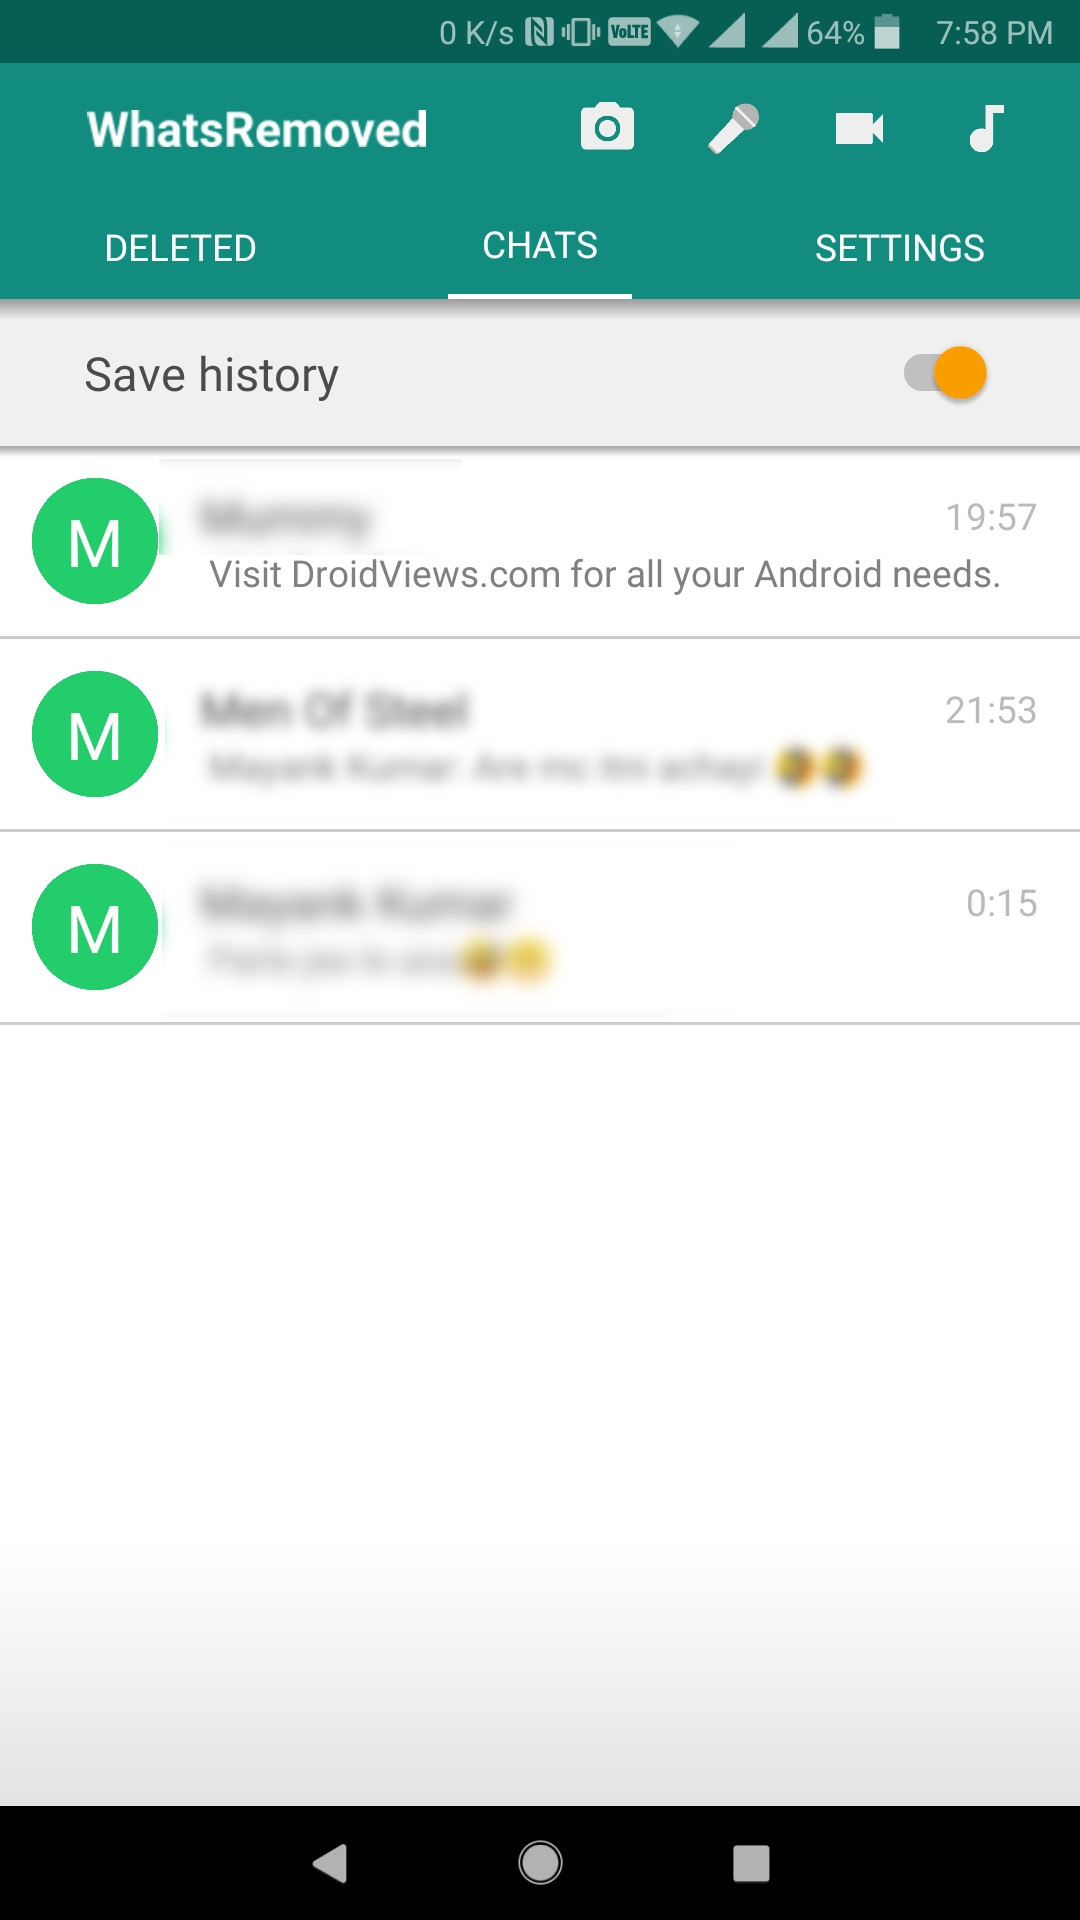 How To View Deleted WhatsApp Messages